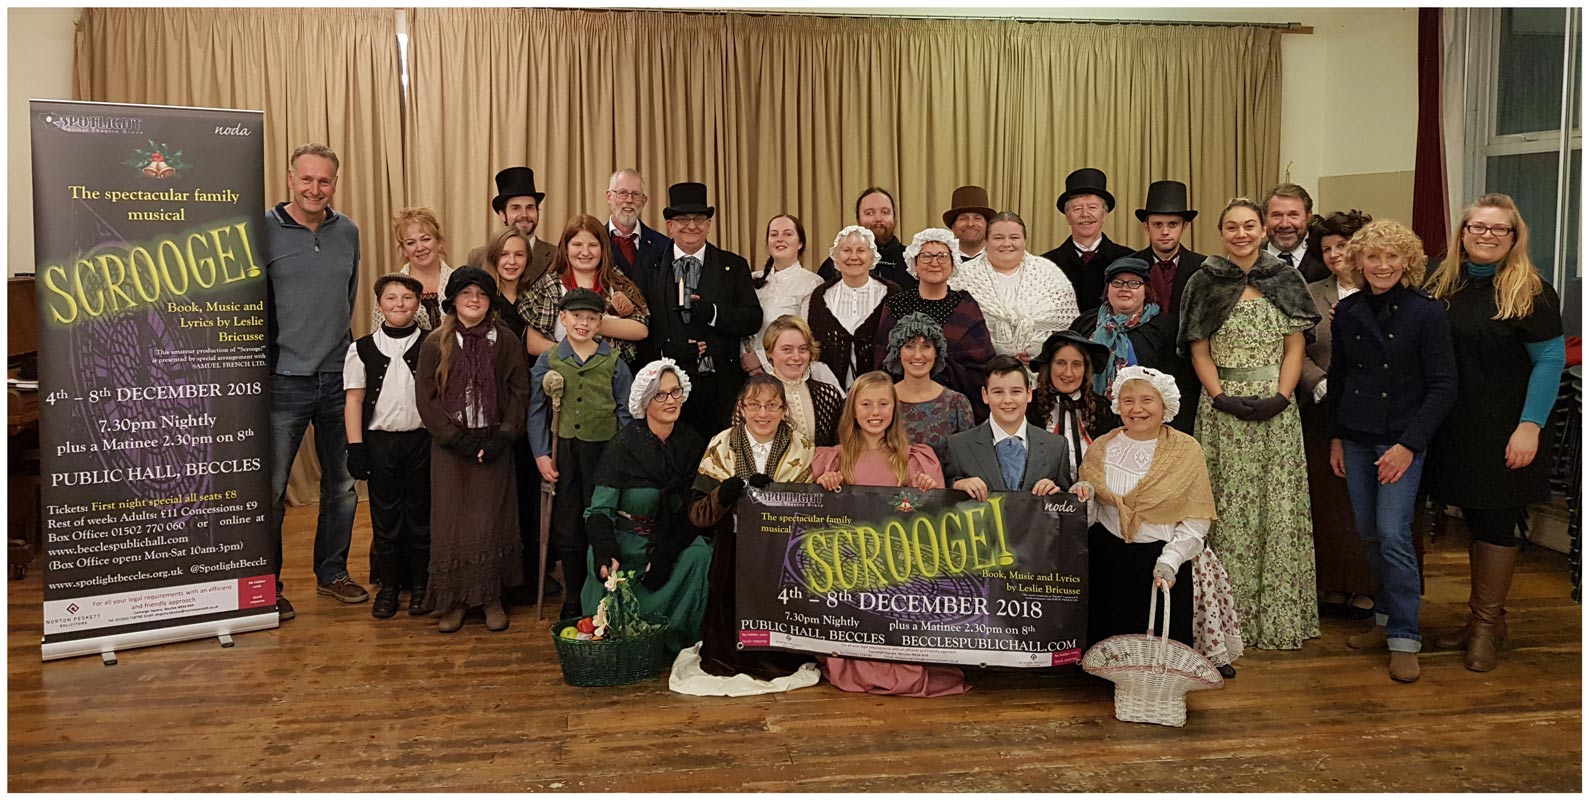 Norton Peskett Chief Executive Bob Bryant, left, with the production team and cast of Scrooge!